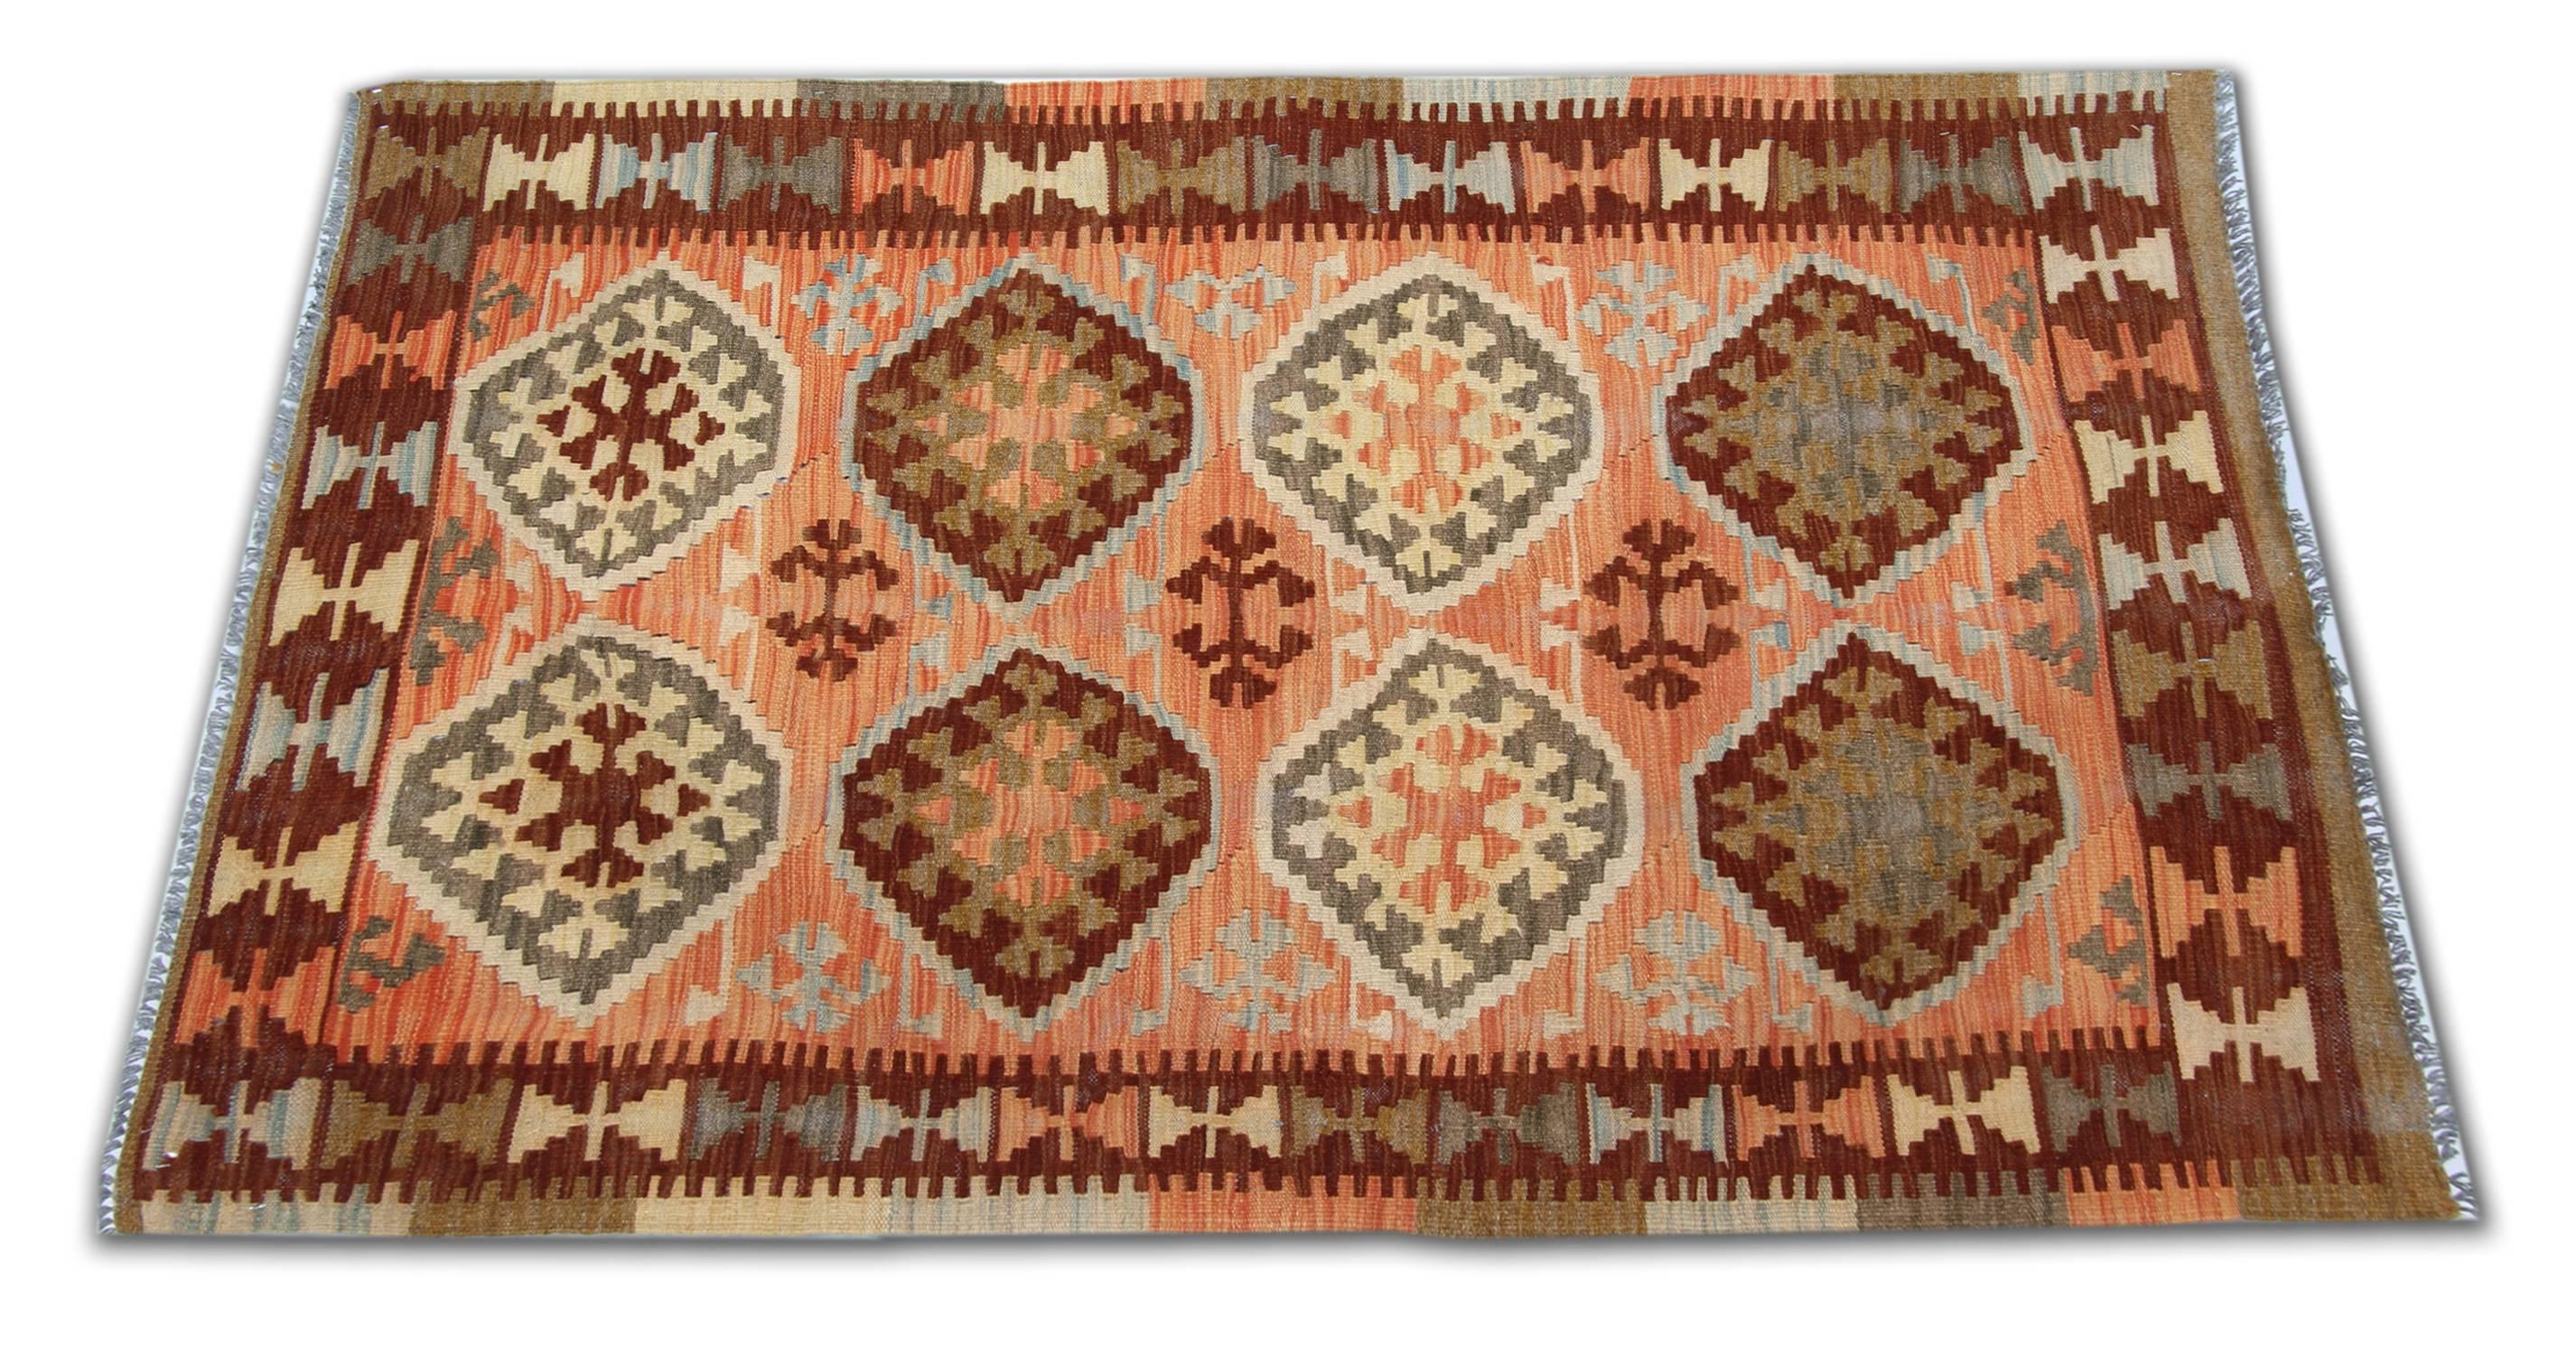 This Kilim rug is contemporary because is newly handmade in Afghanistan by Uzbek and Turkman tribes but shows traditional symbols deriving from the Persian Qashqai tribes. The materials used are wool and cotton of the highest quality in addition the